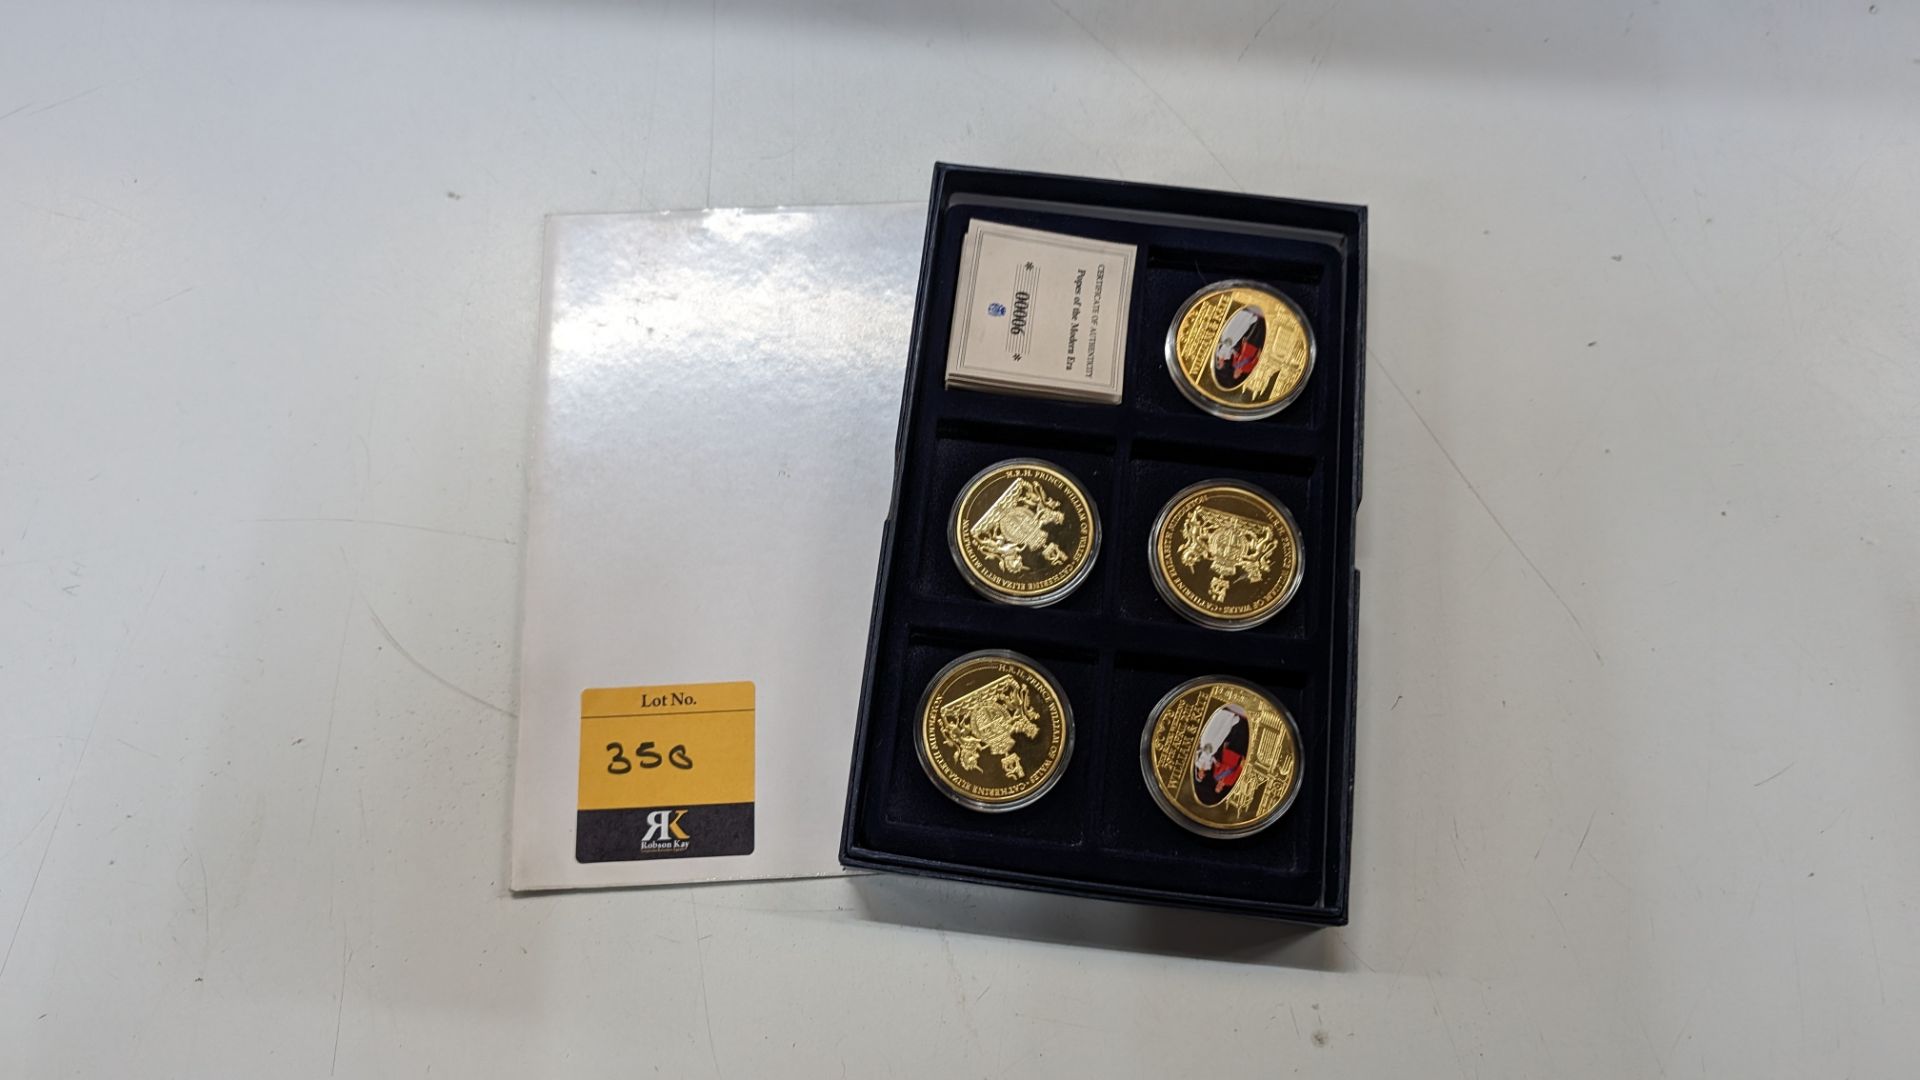 5 off assorted decorative coins as pictured including presentation box - Image 11 of 11